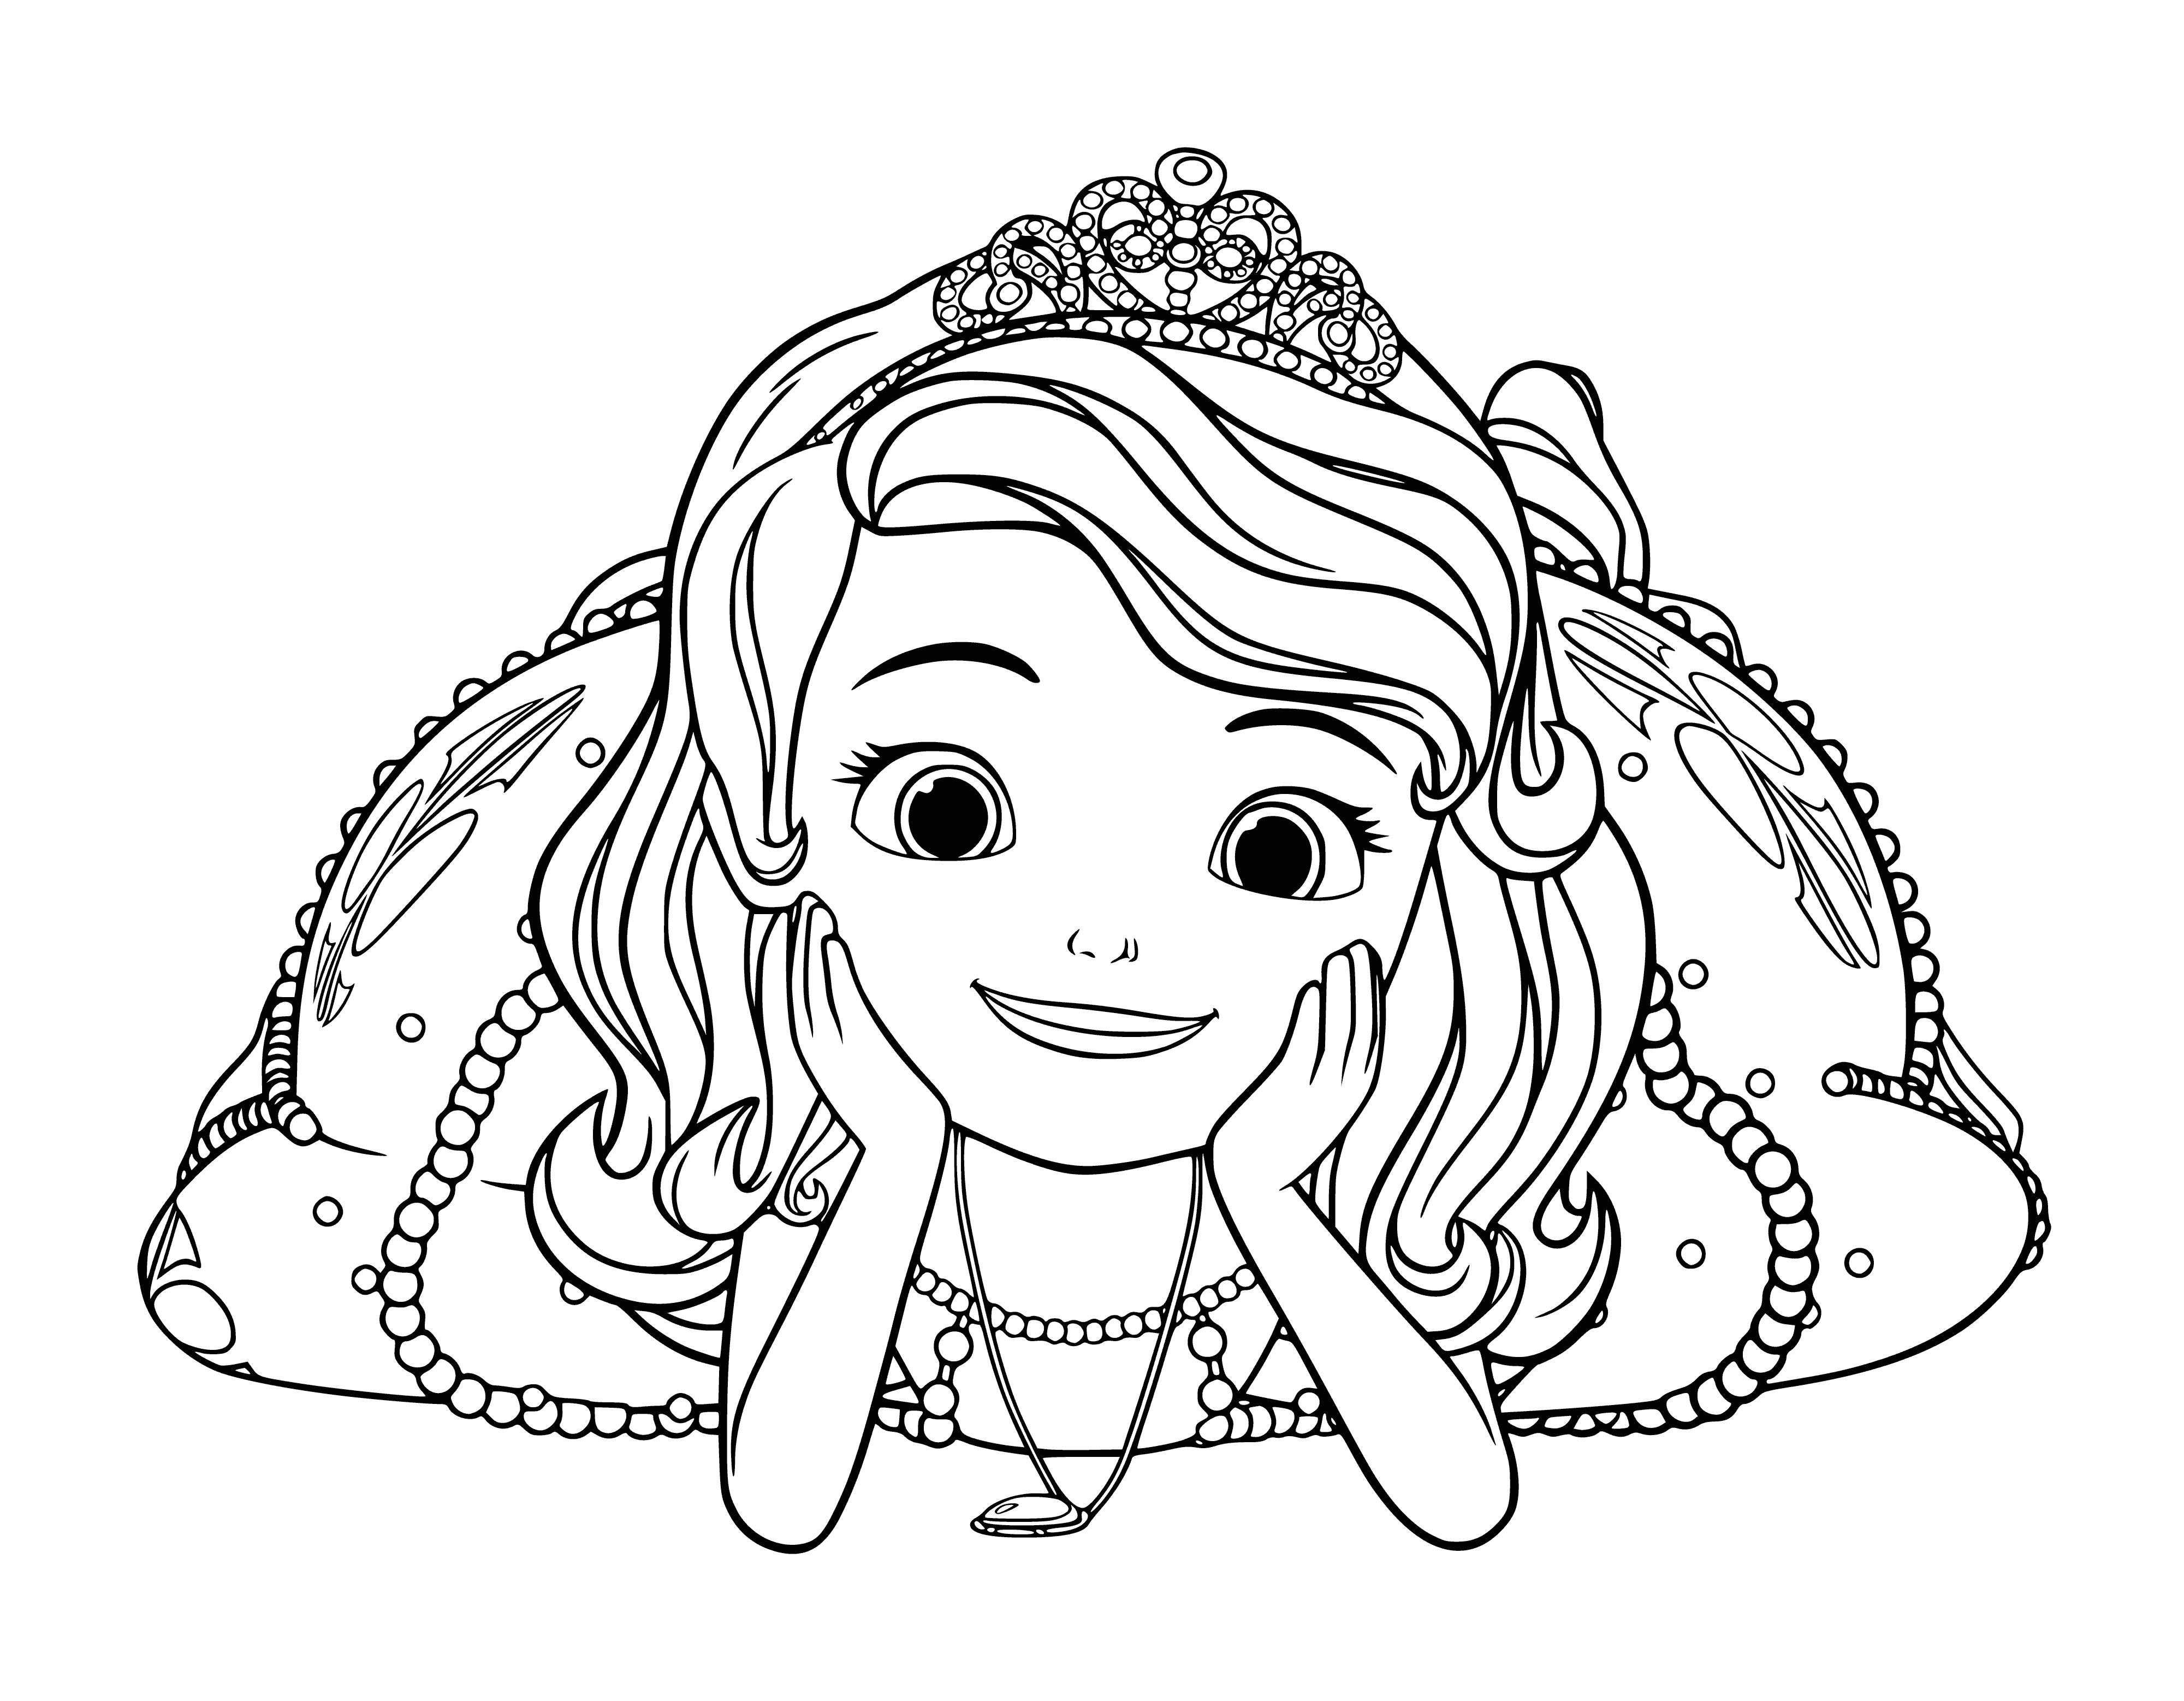 coloring page: Sofia in a big room with others, wearing a purple dress and gold crown; she looks happy and excited. #SofiaTheFirst